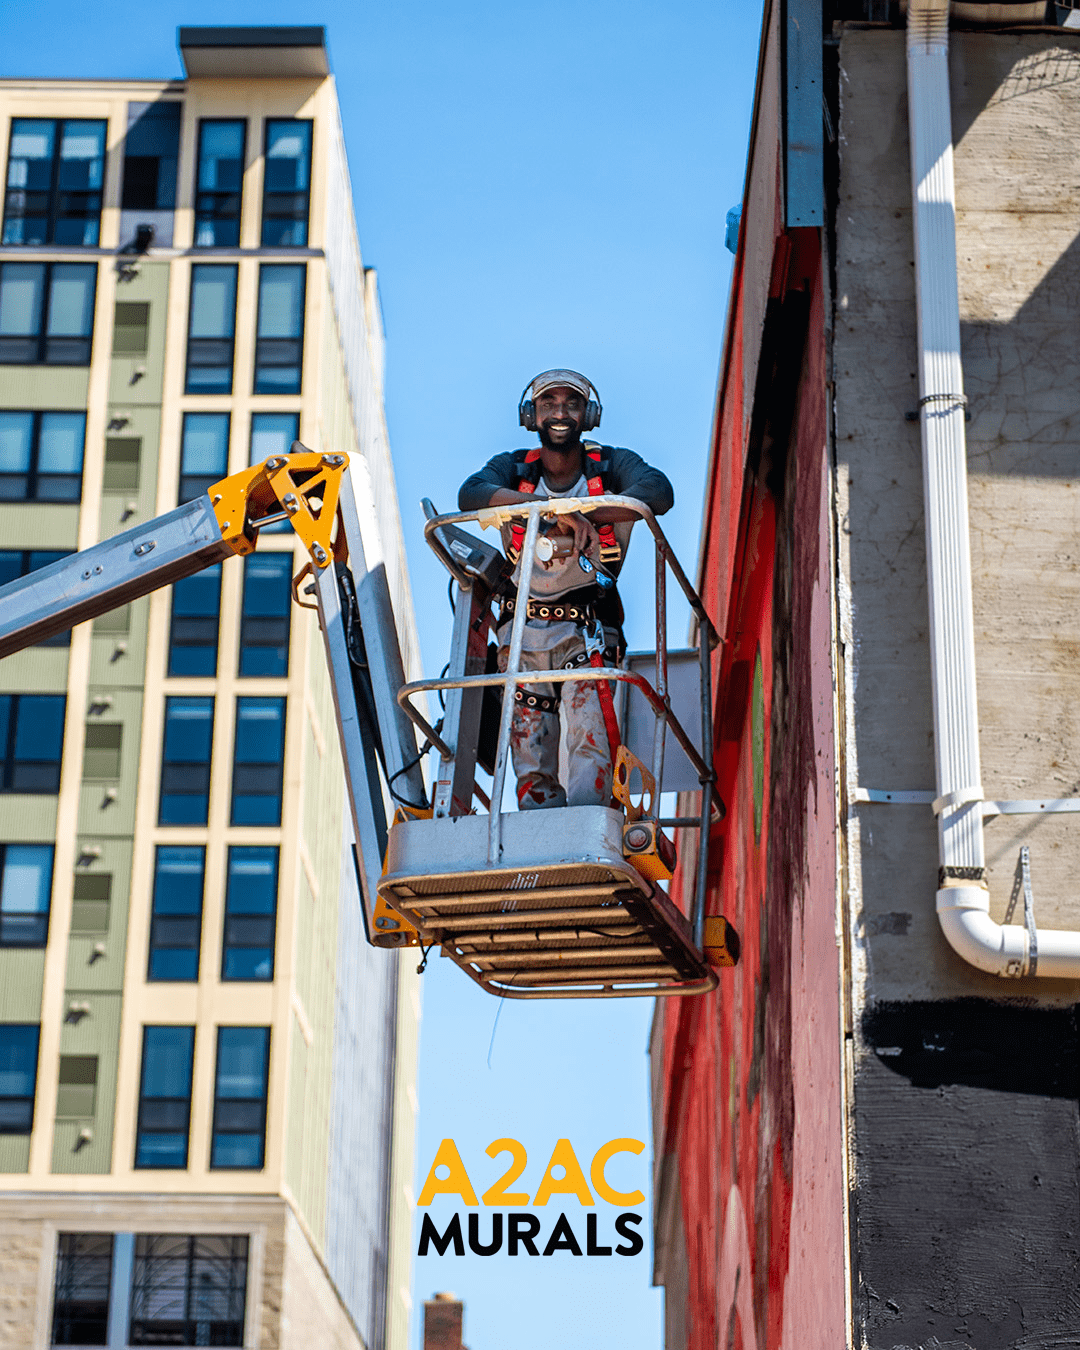 A2AC Murals project celebrates downtown